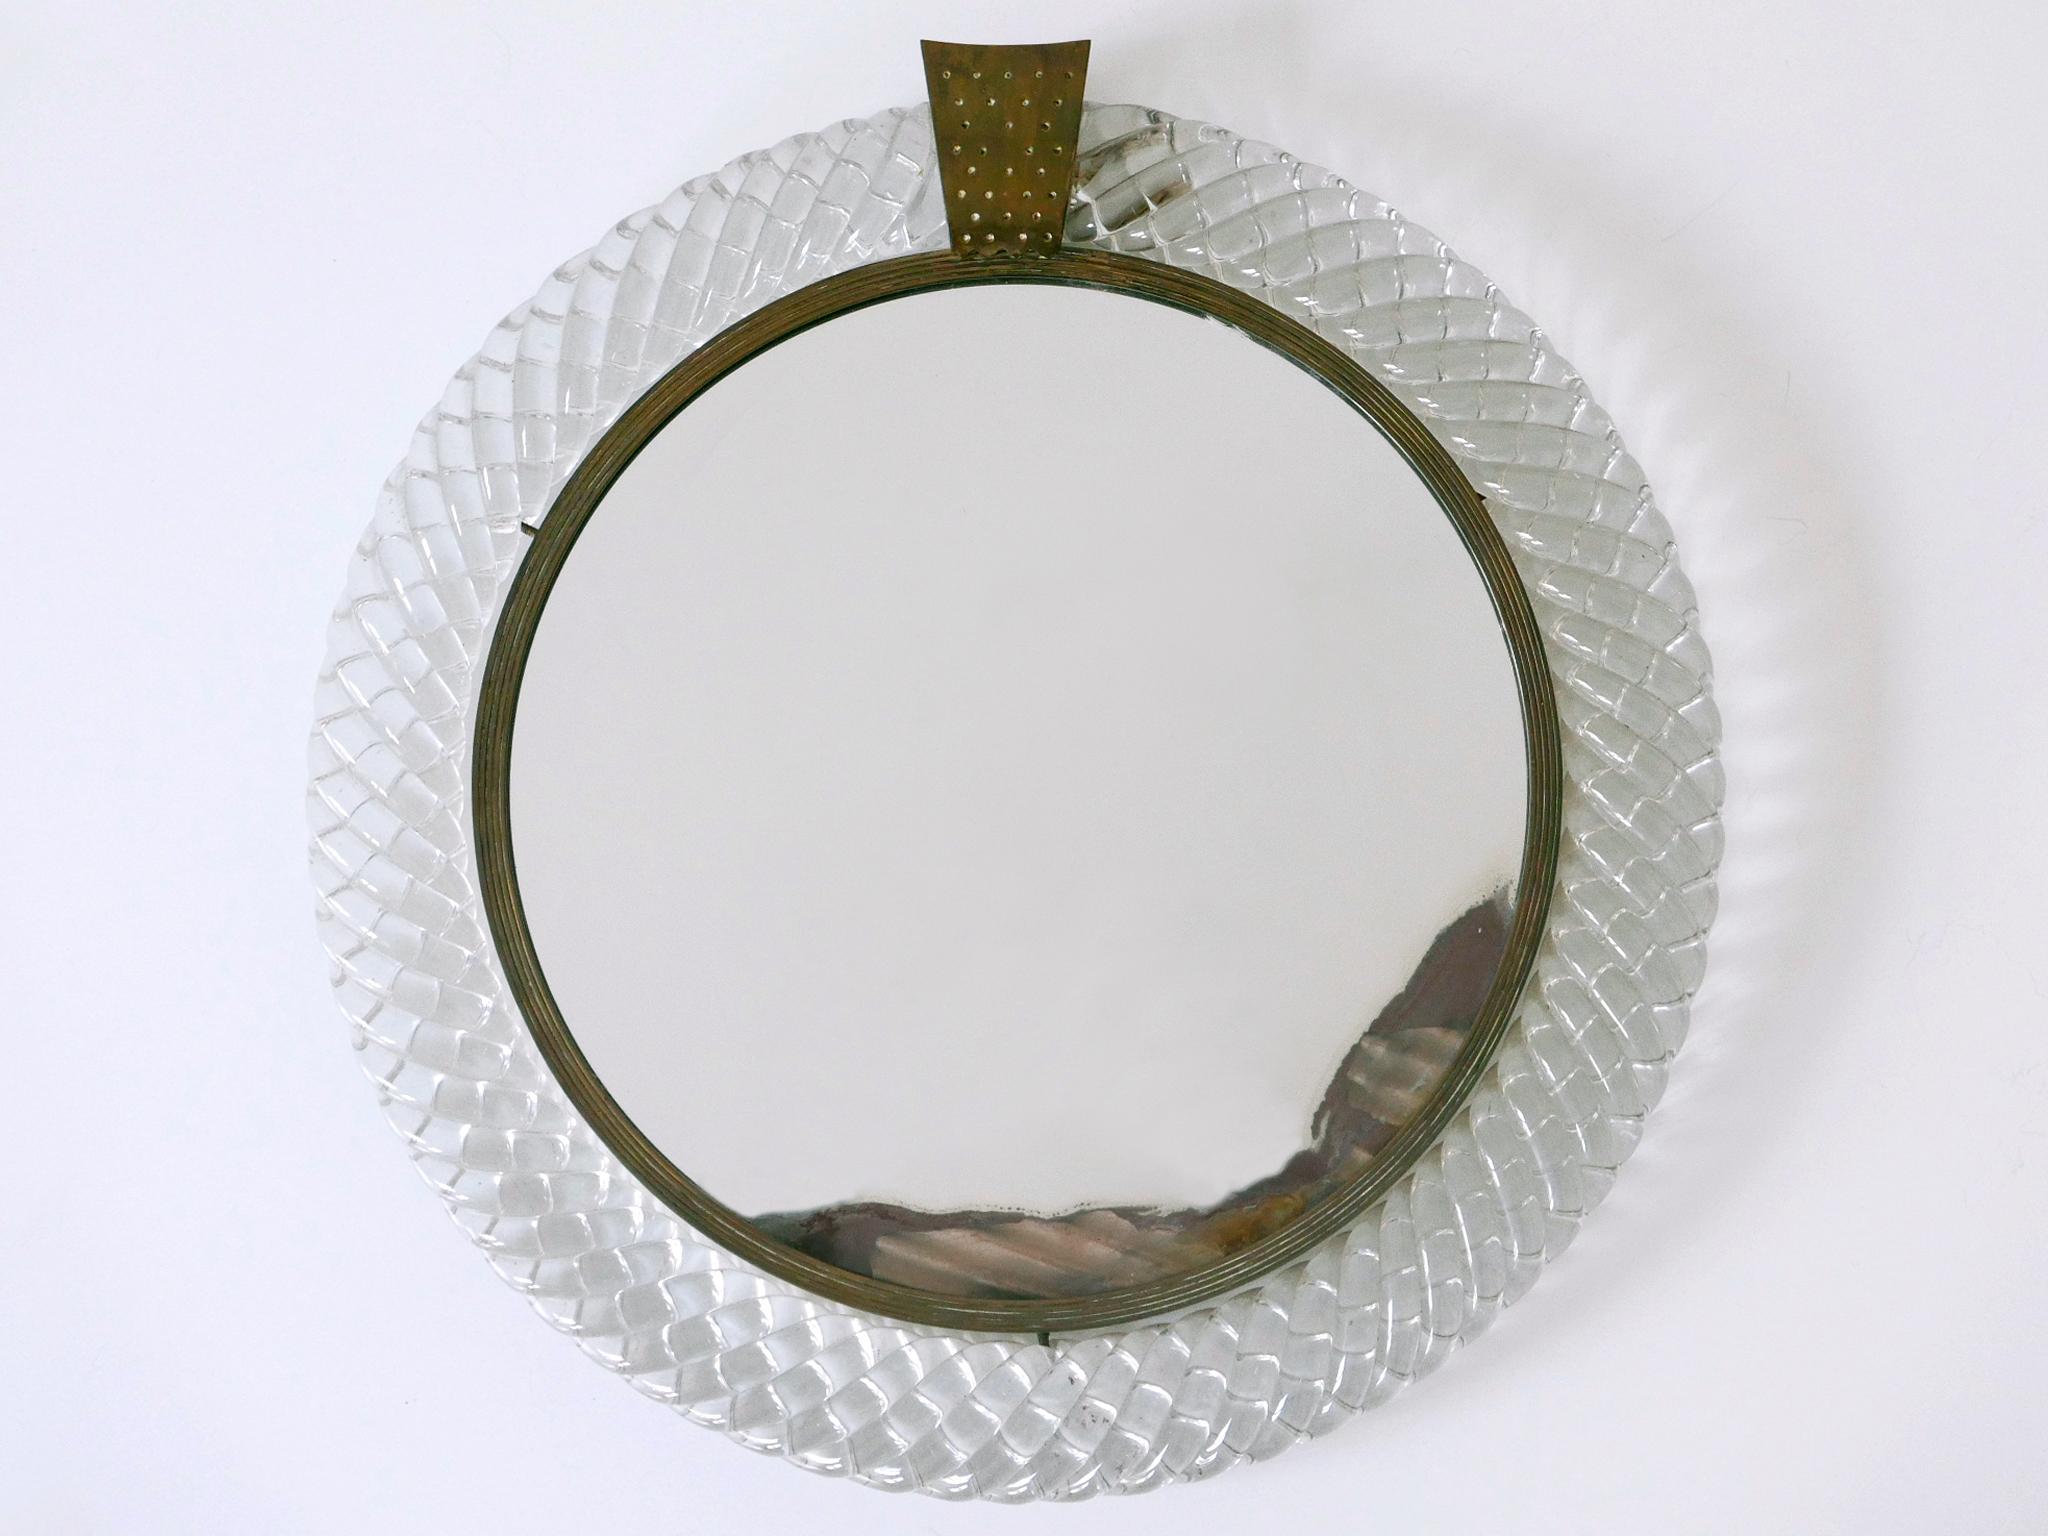 Rare and elegant Mid Century Modern Murano Glass treccia frame wall mirror. Designed by Carlo Scarpa for Venini, Italy, 1950s.

Executed in Murano Glass, mirror glass, brass and plywood.

Measurements:
Overall diameter: 15.36 in. (39 cm)
Height: